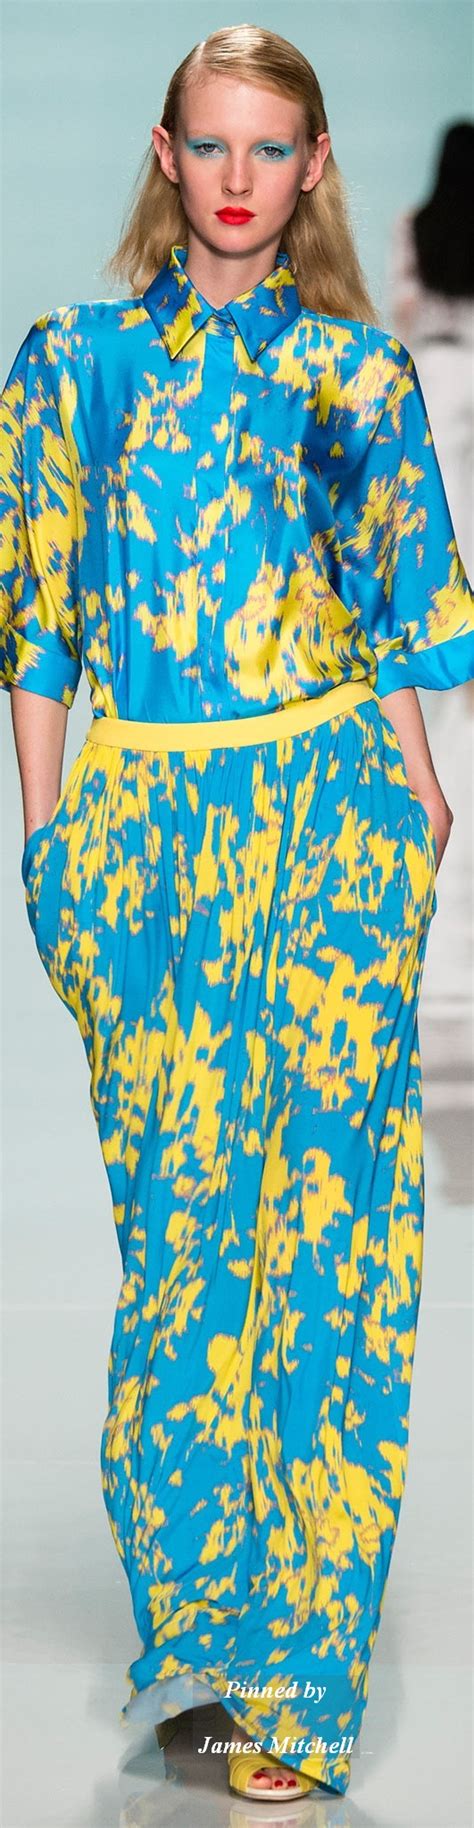 Emanuel Ungaro Collection Spring 2015 Ready To Wear Colorful Fashion